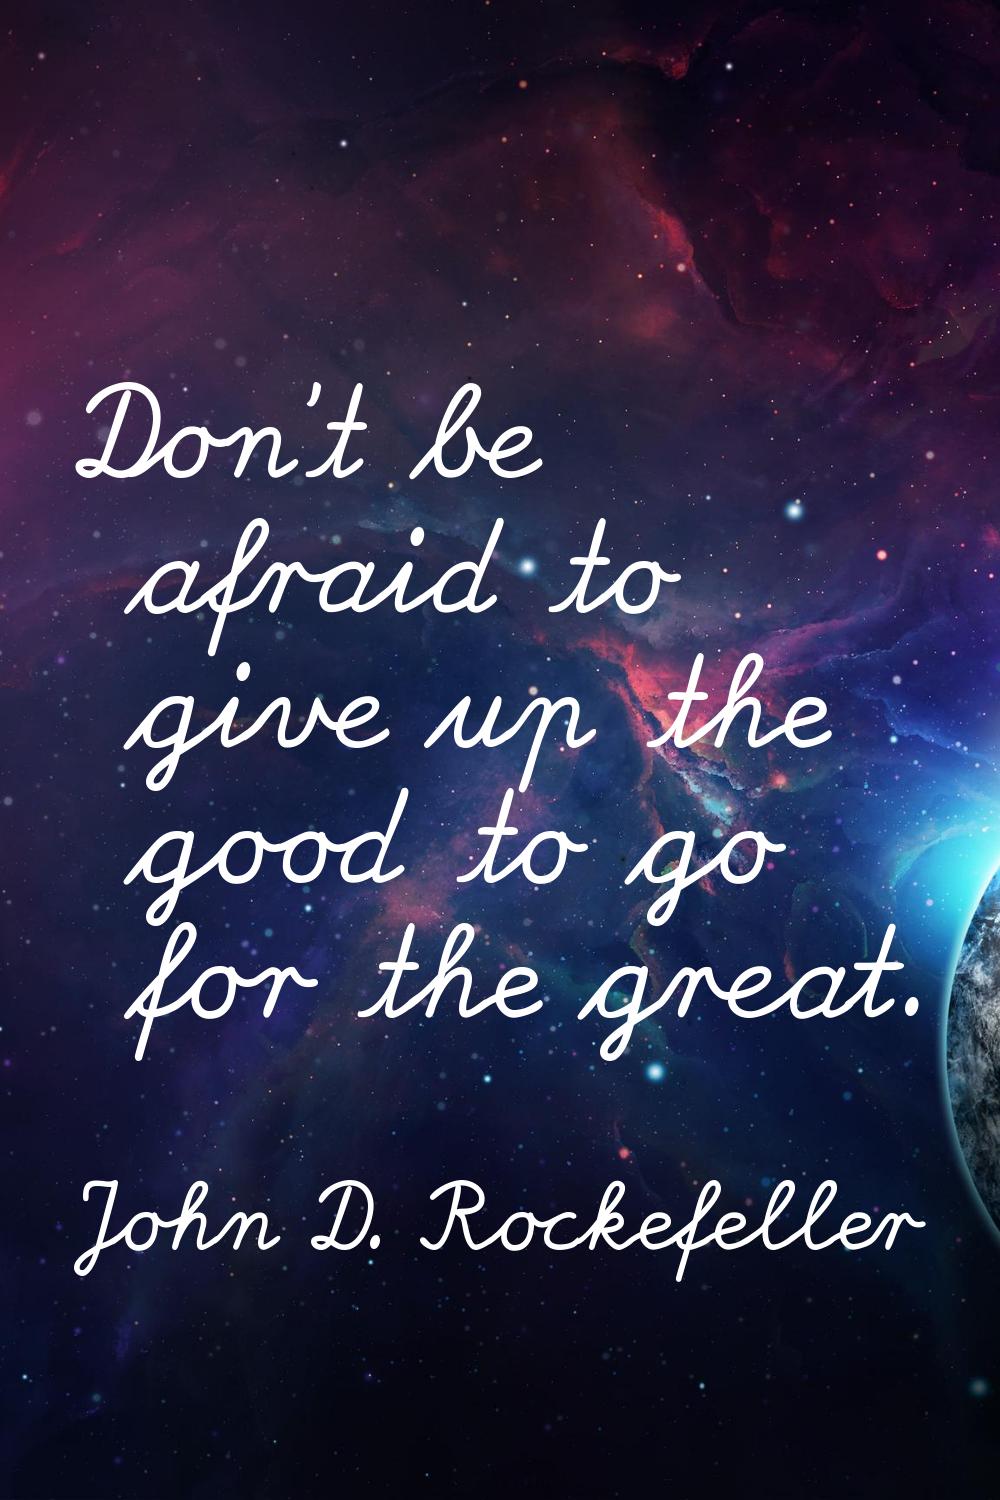 Don't be afraid to give up the good to go for the great.